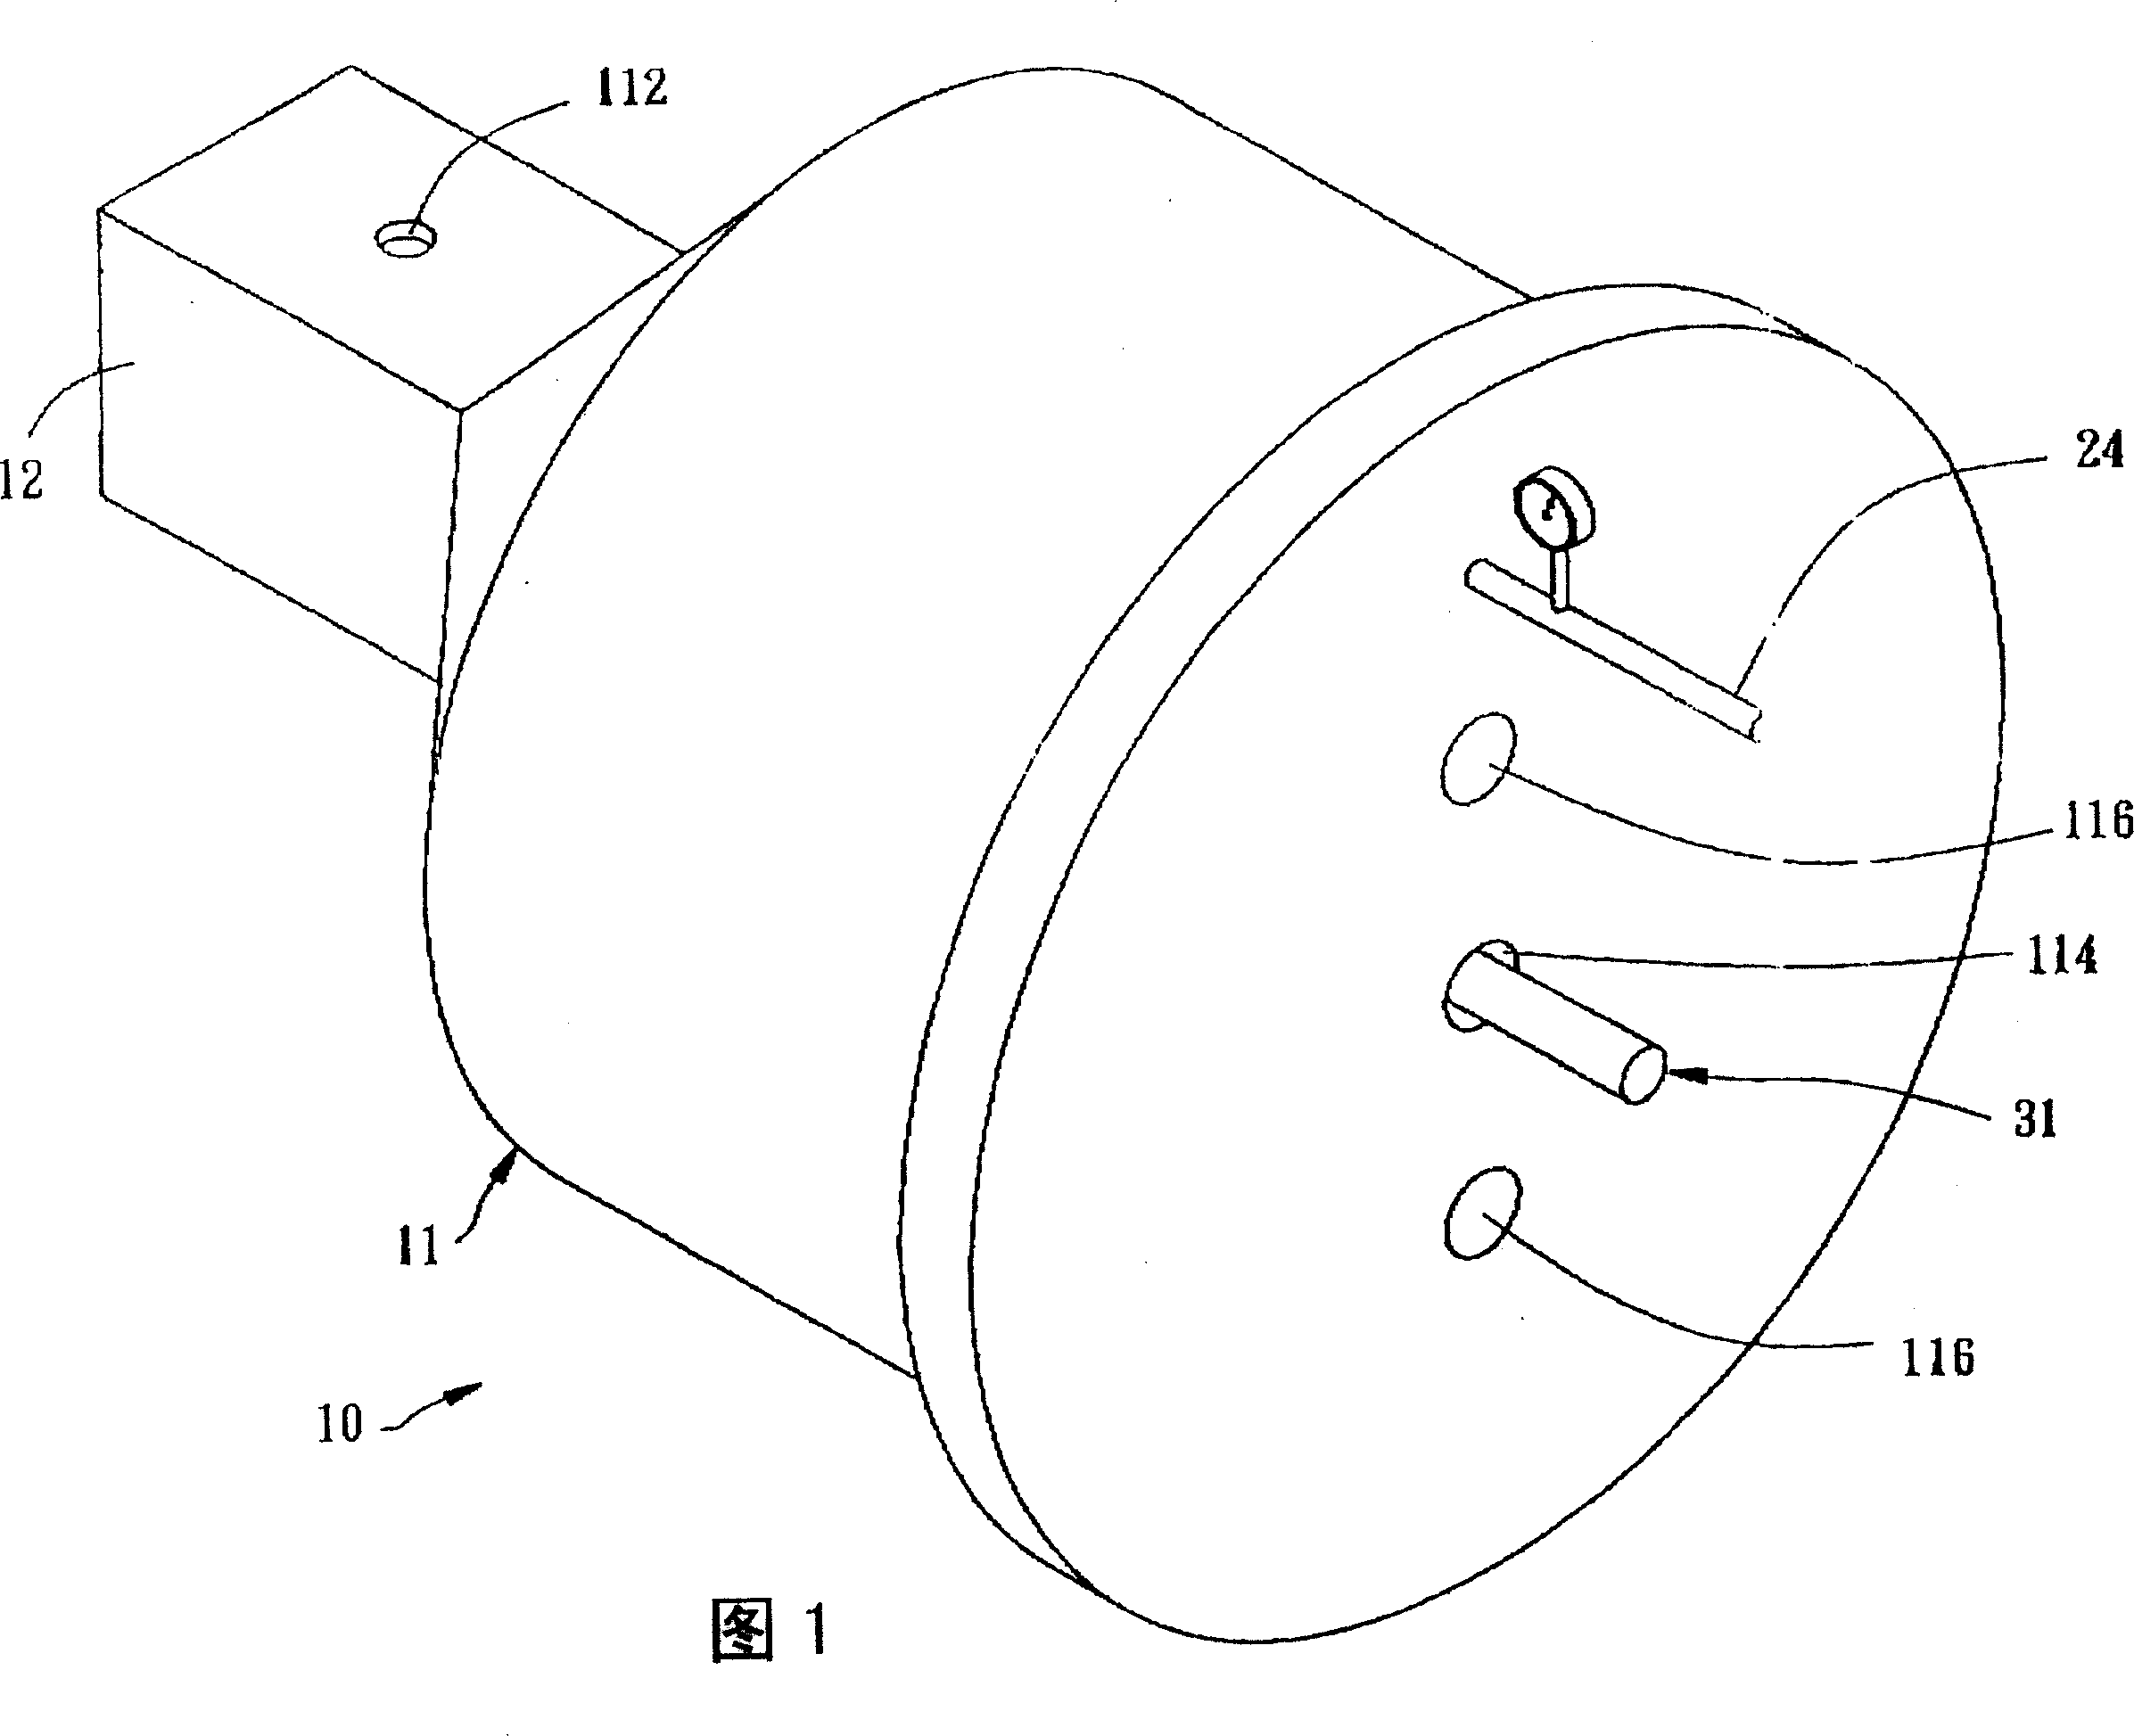 Apparatus for operating and observing air under vacuum or low-pressure environment